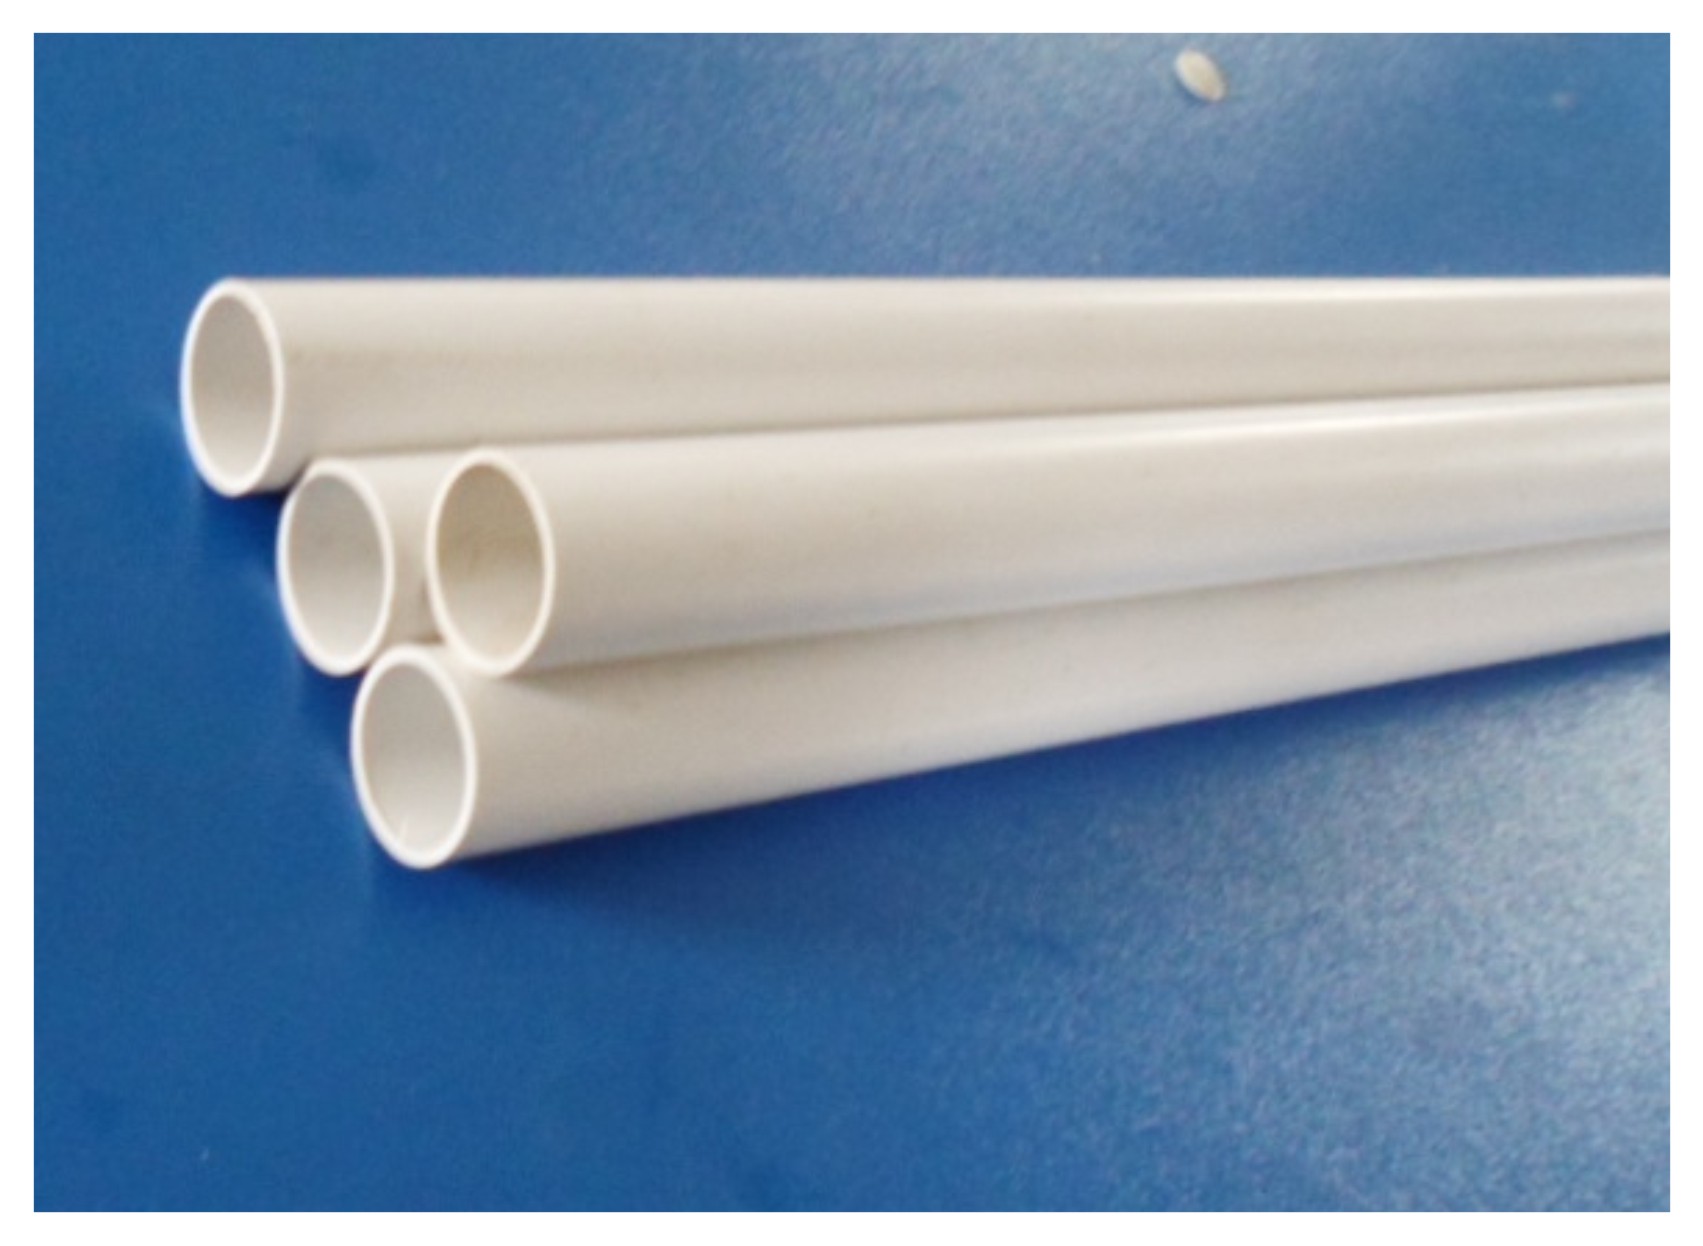 25mm conduit pipes. Made durable, Lightweight and easy to cut.